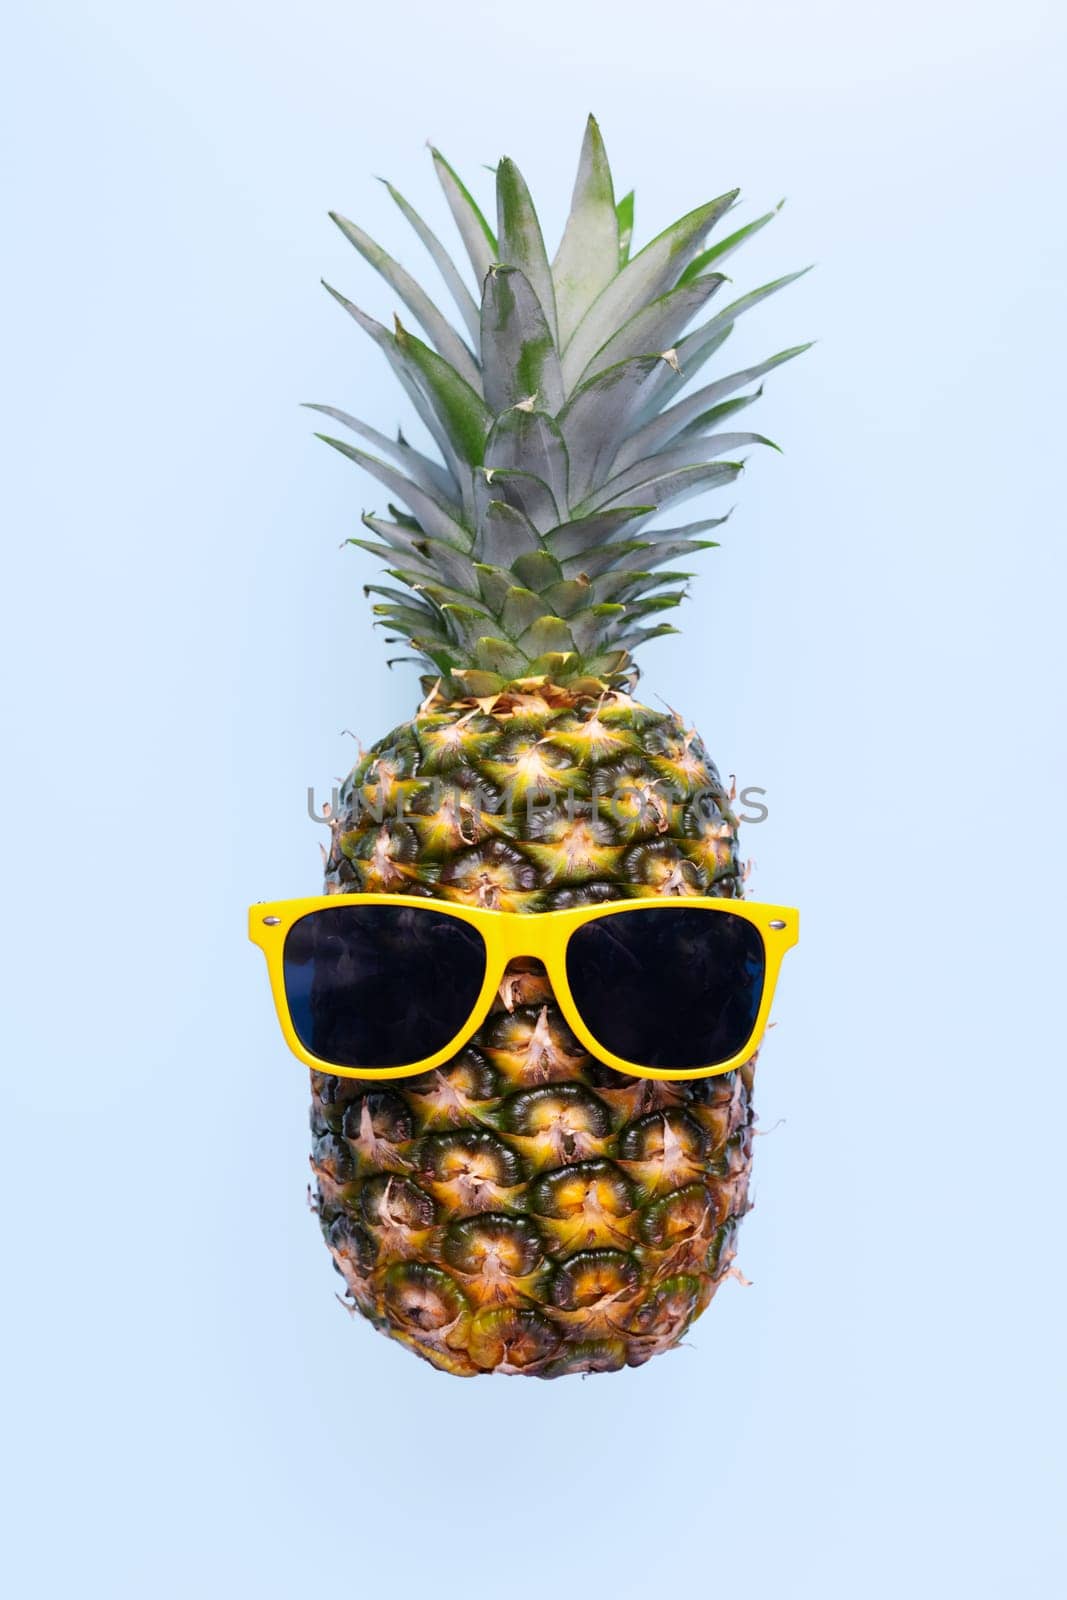 Pineapple with sunglasses on blue background by andreyz